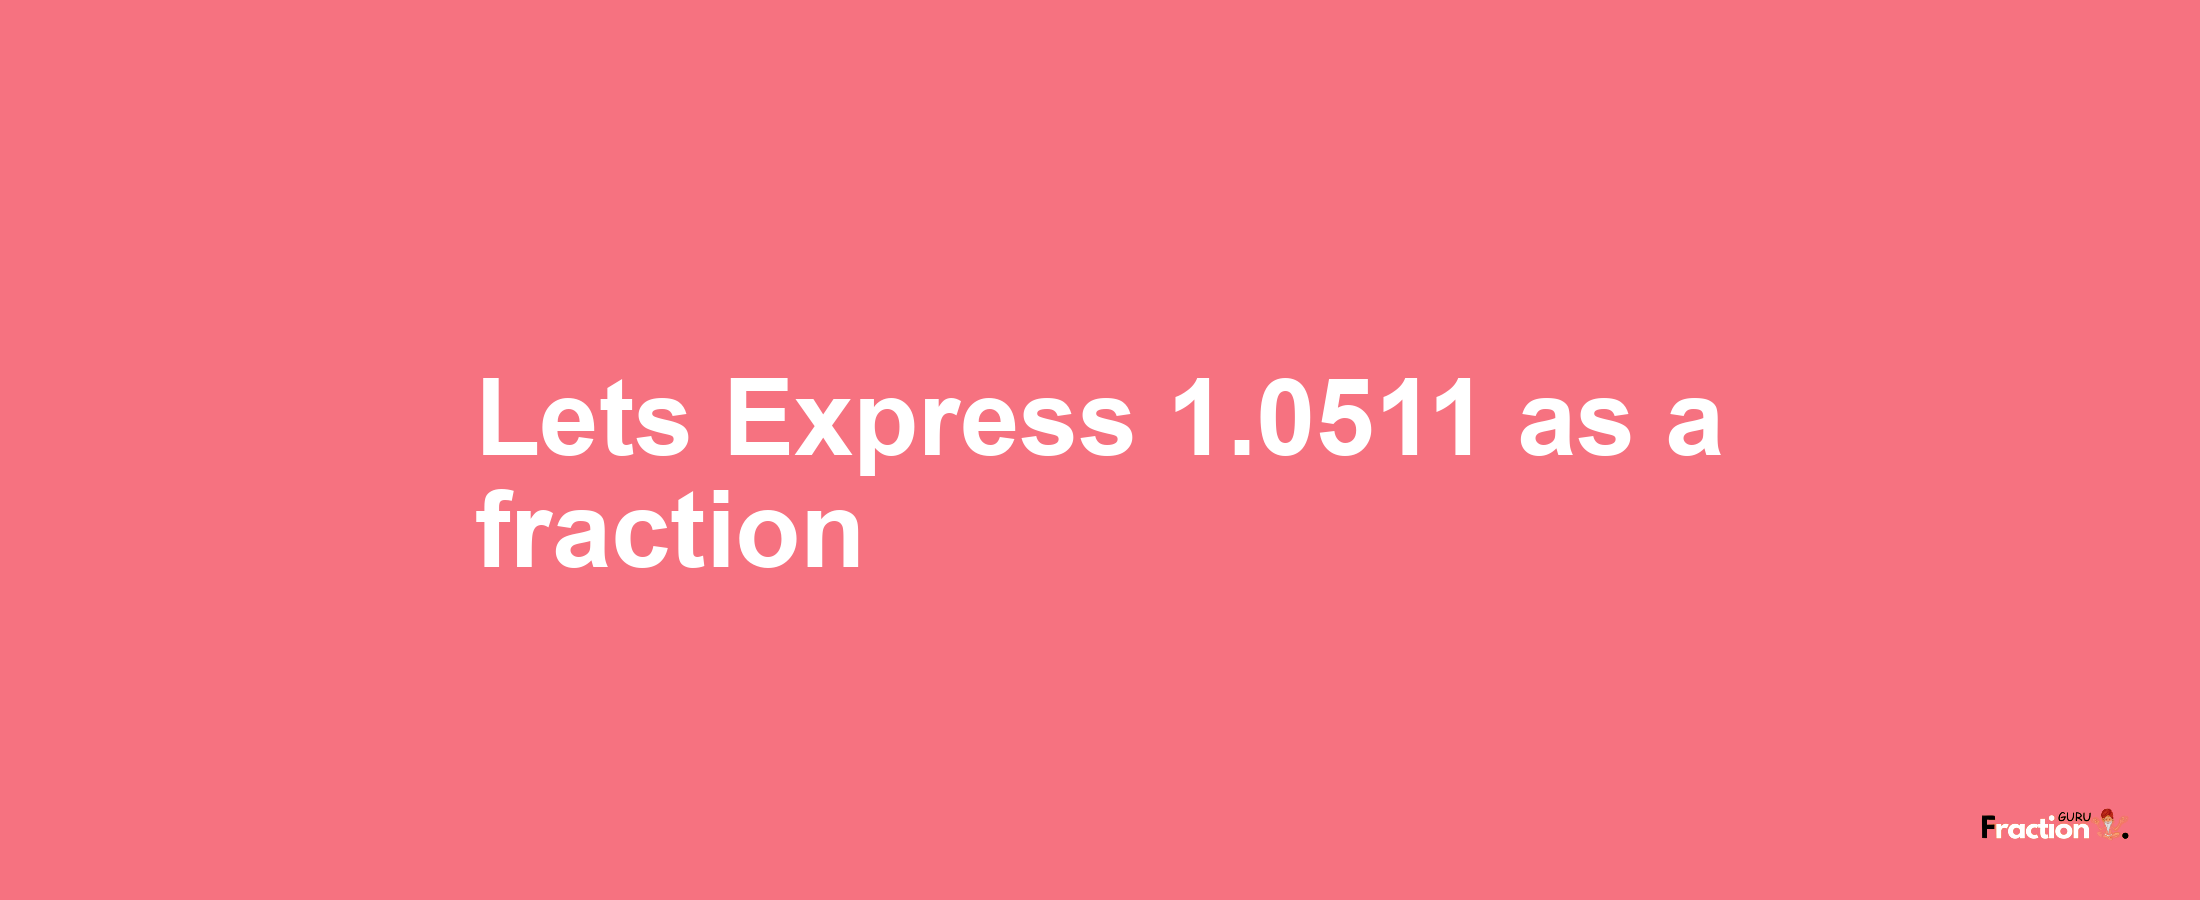 Lets Express 1.0511 as afraction